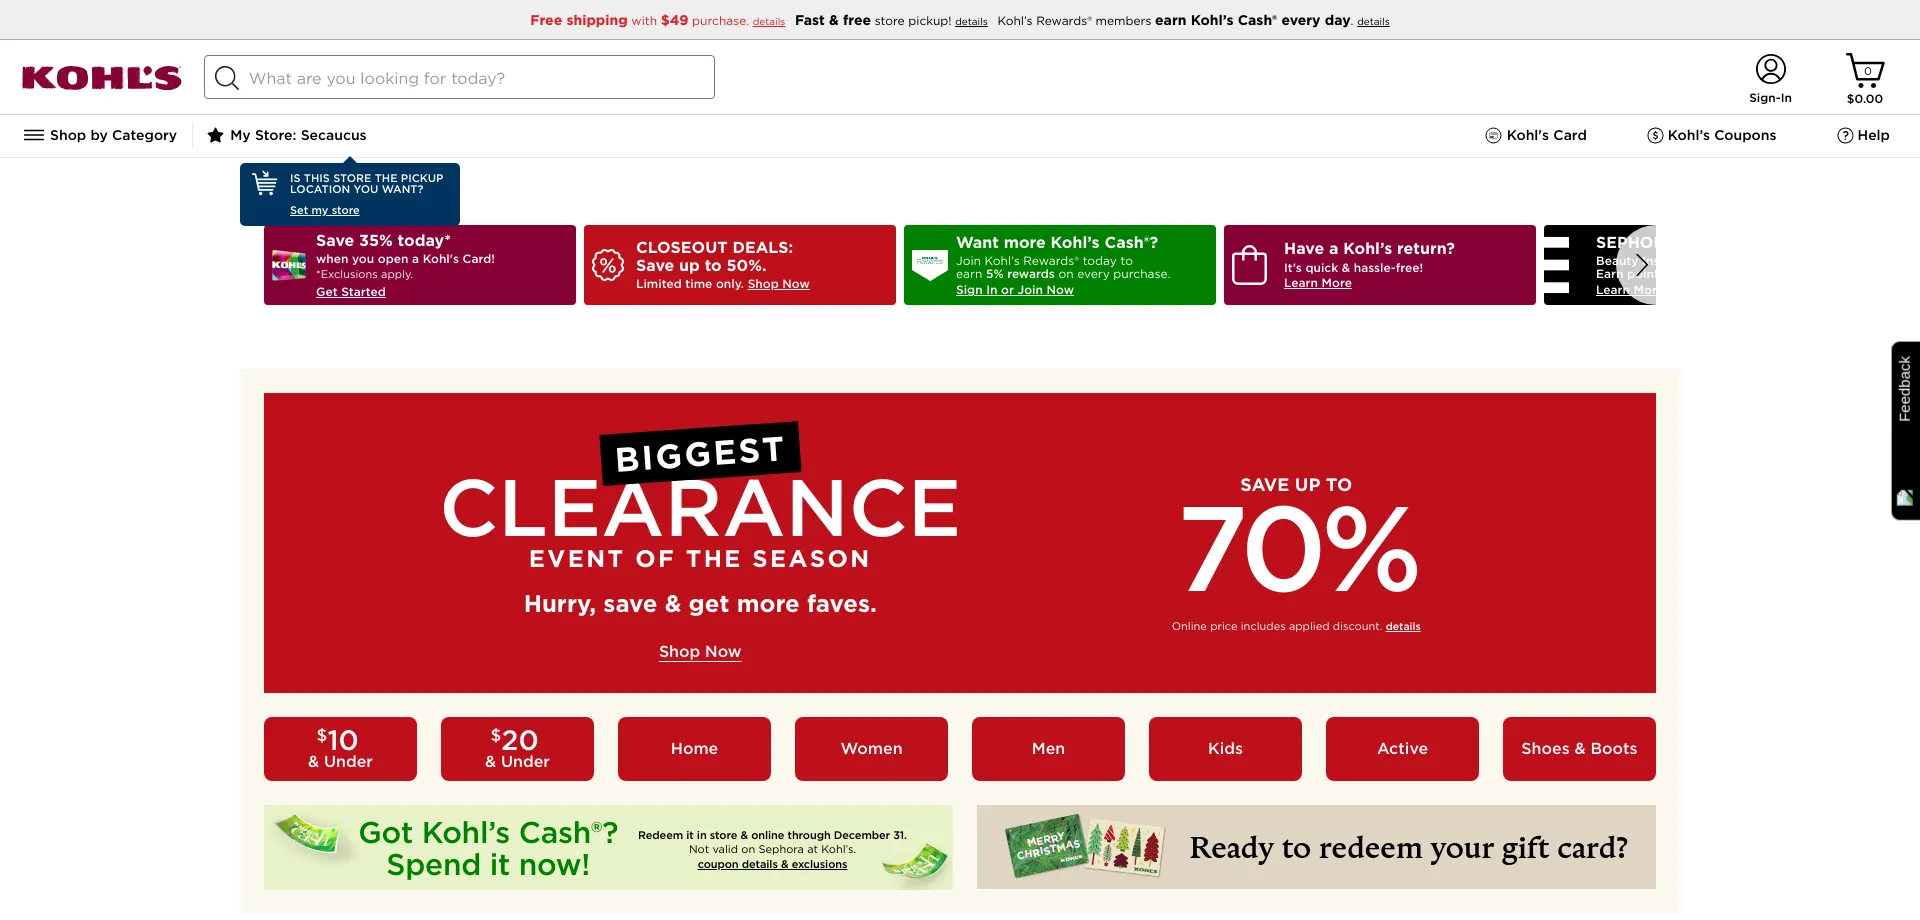 Kohl's Clearance: How to Shop It For the Biggest Savings - The